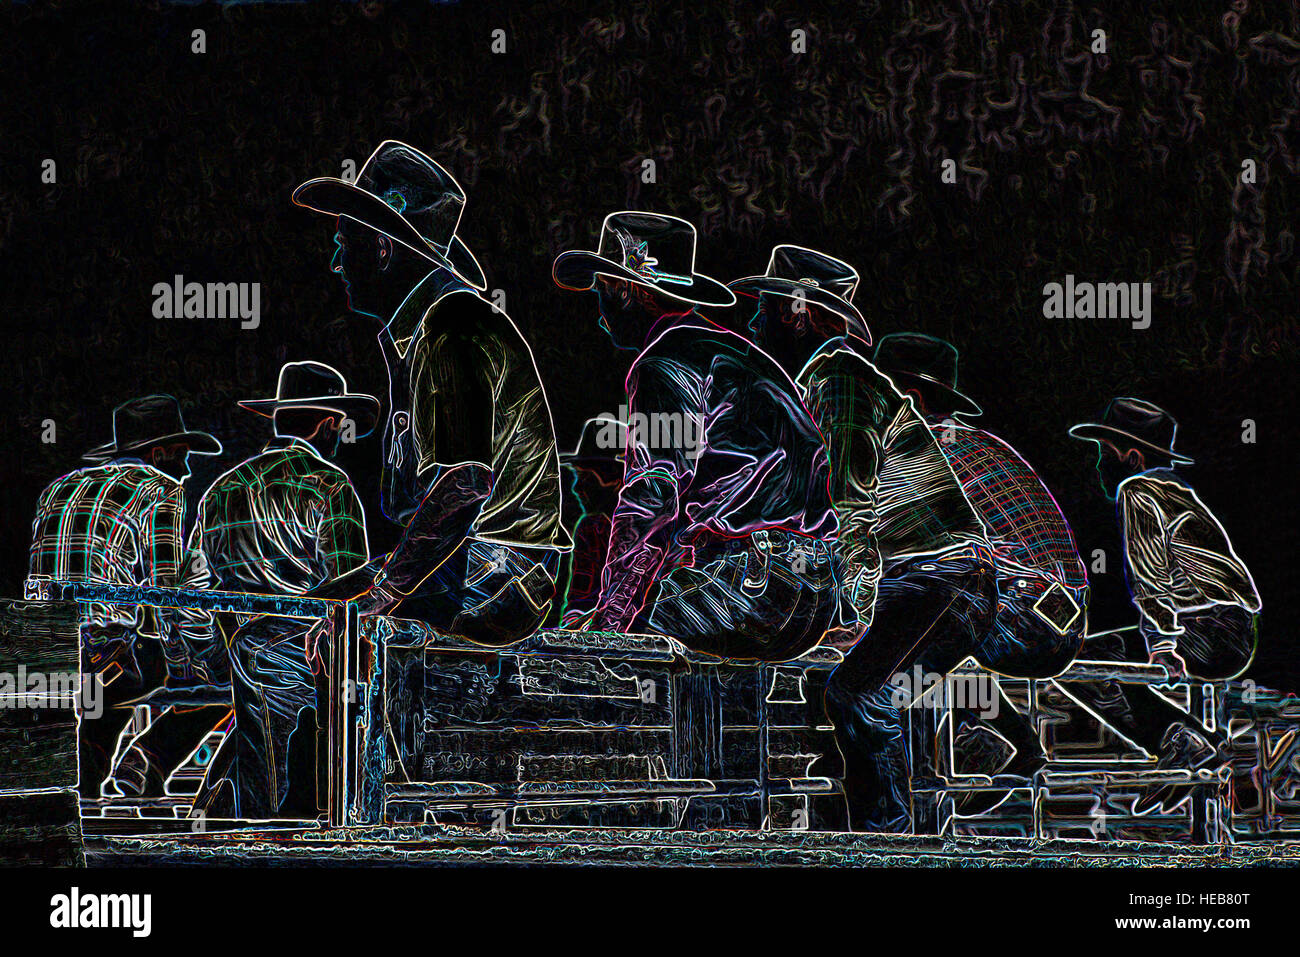 Cowboys sitting on Fence at Rodeo - Digitally Manipulated Image with Glowing Edges, Abstract Cowboy and Rodeos Stock Photo